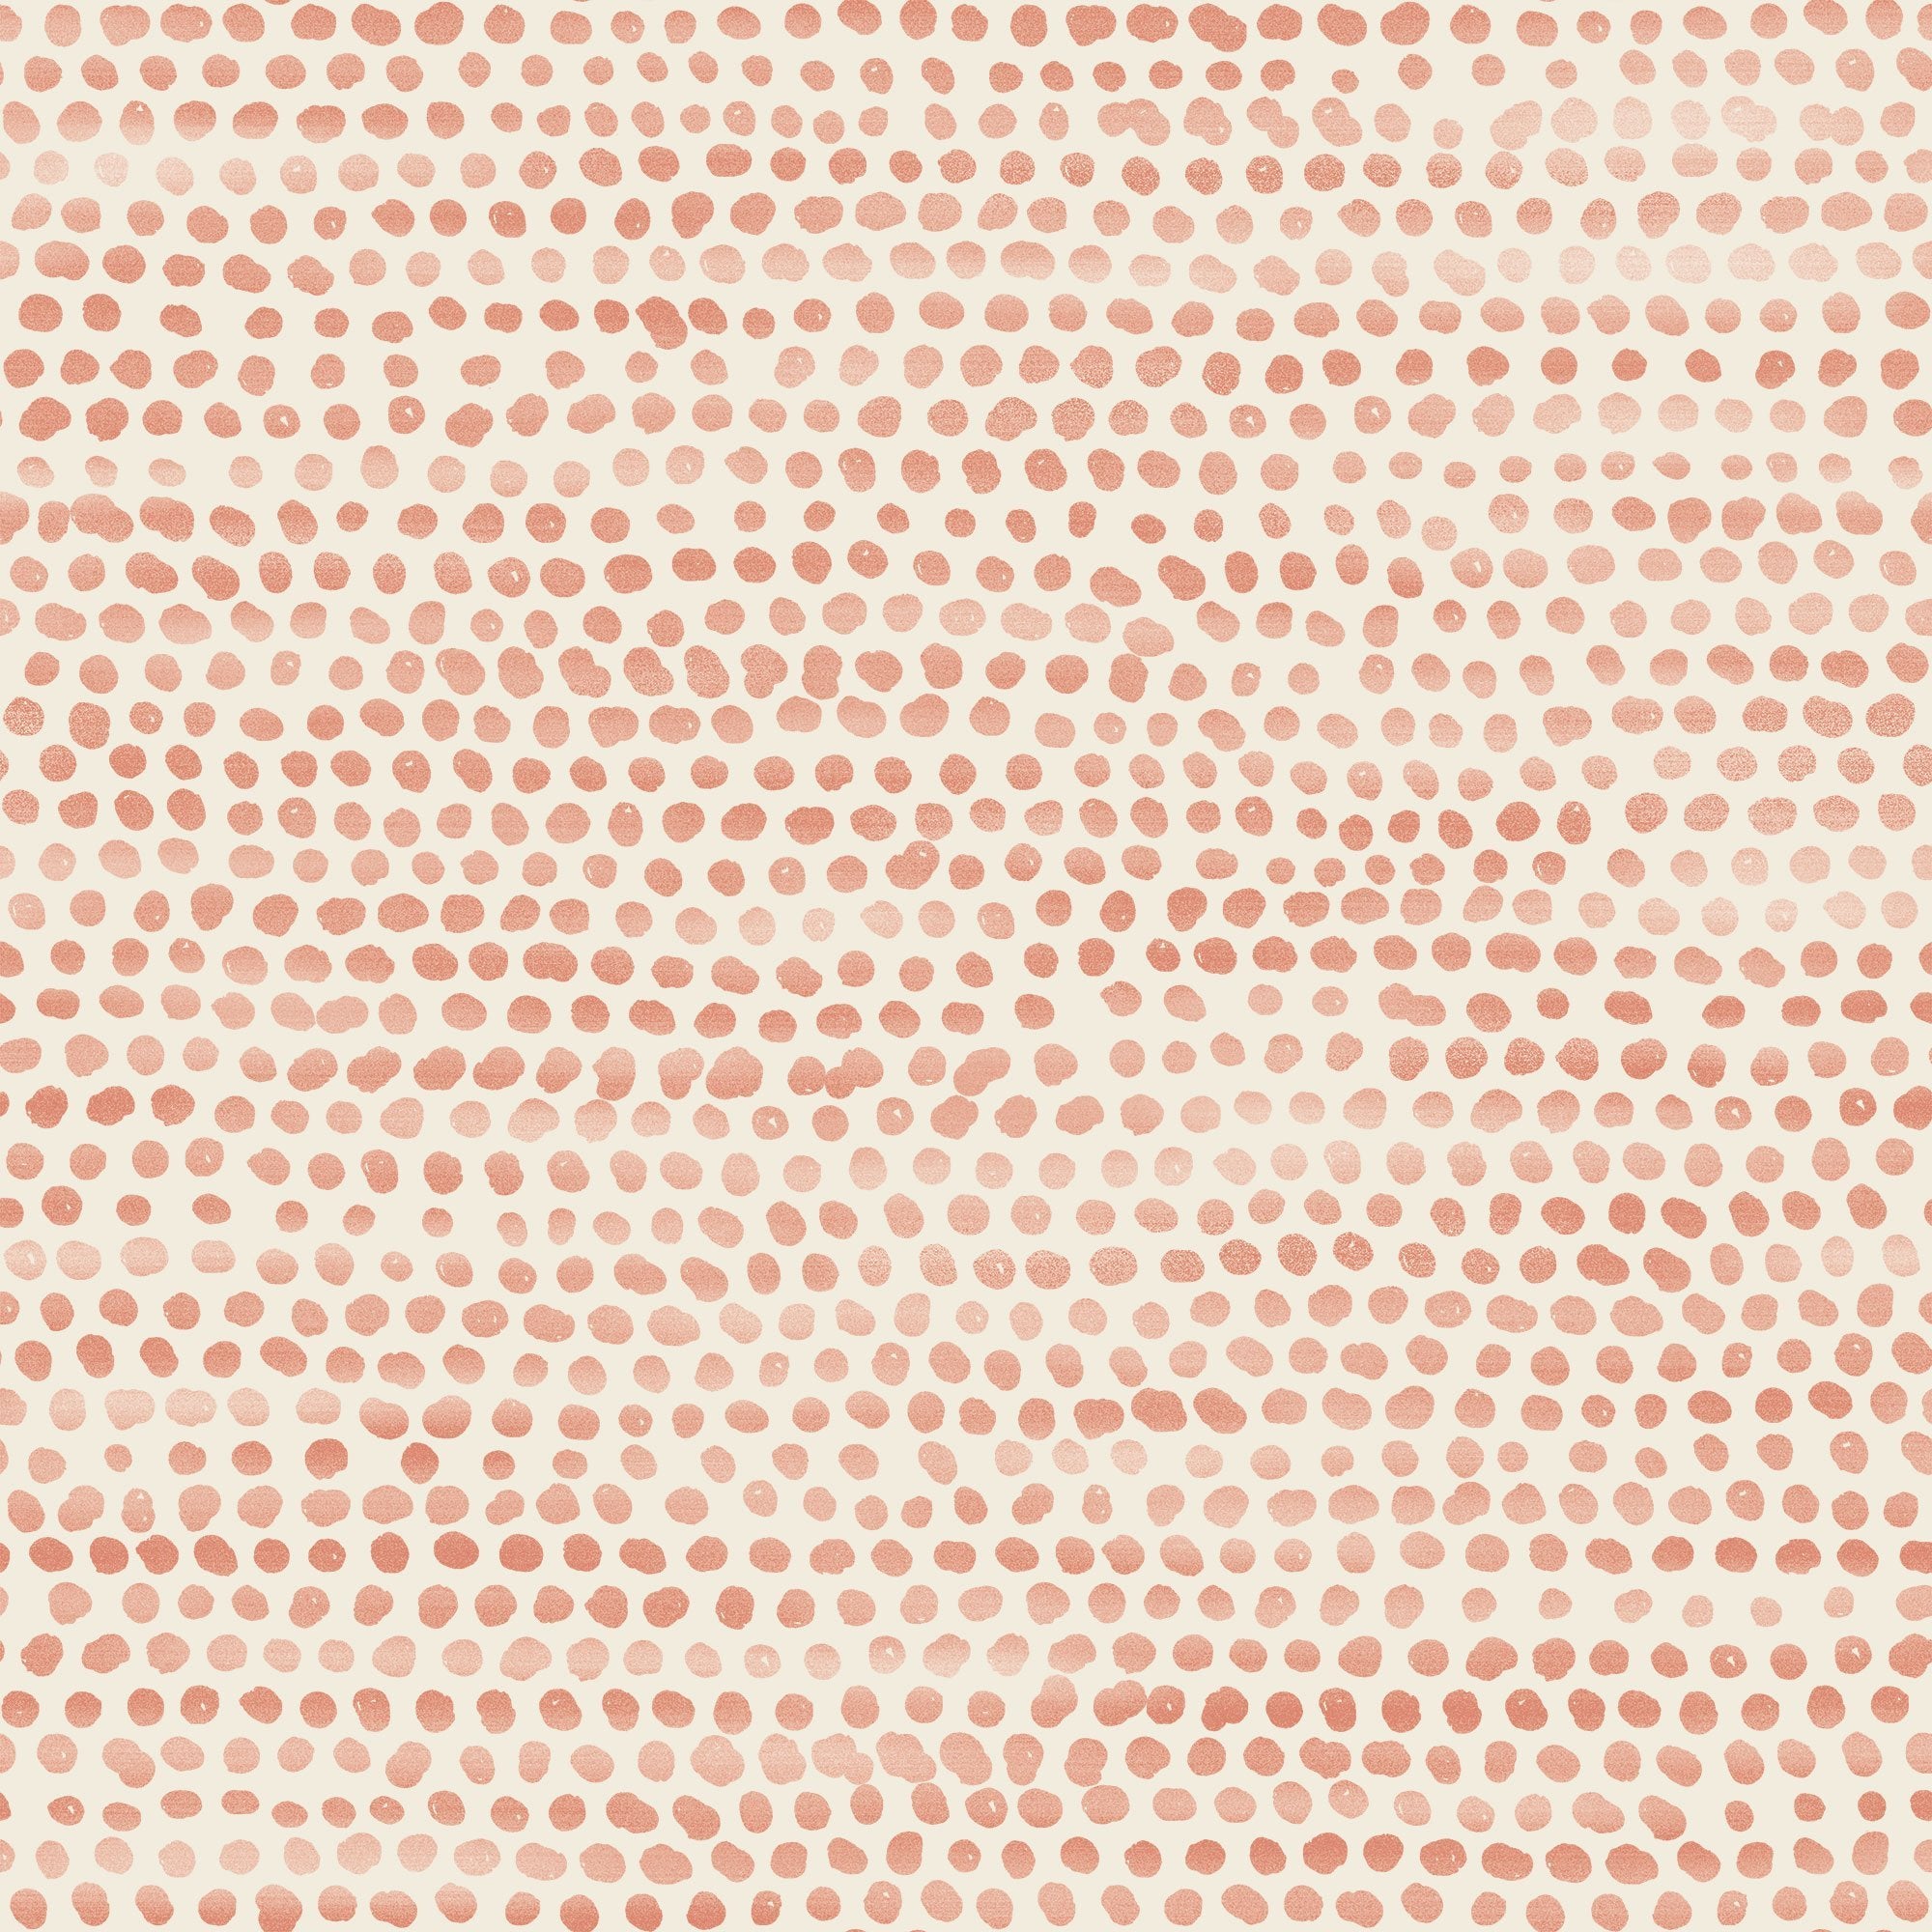 Moire Dots - Coral - Sample